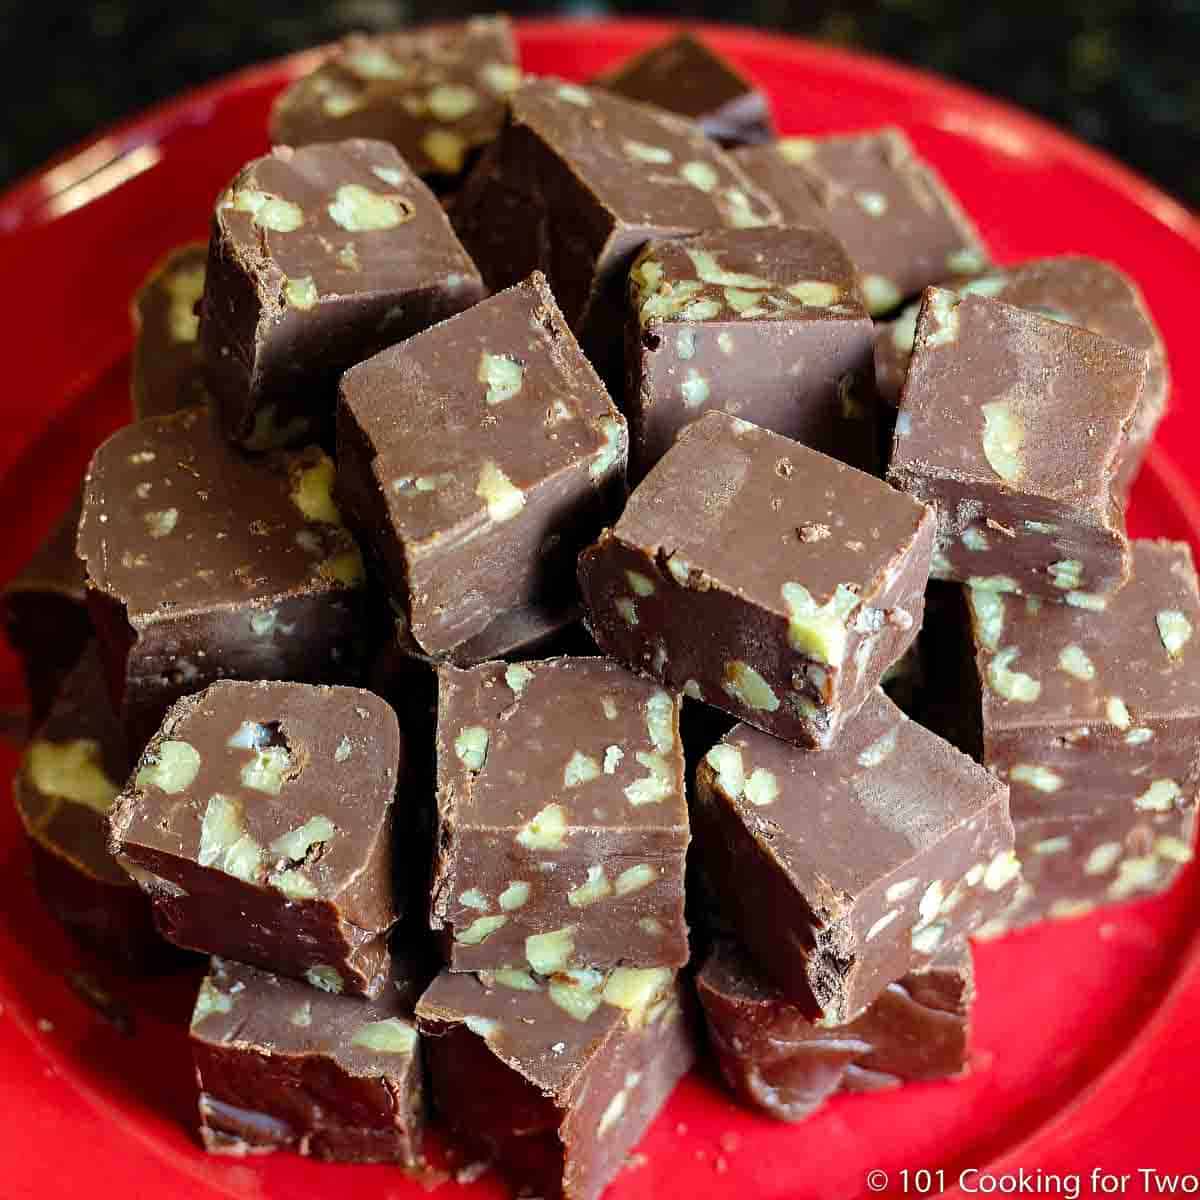 A pile of pieces of fudge with nuts on a red plate.